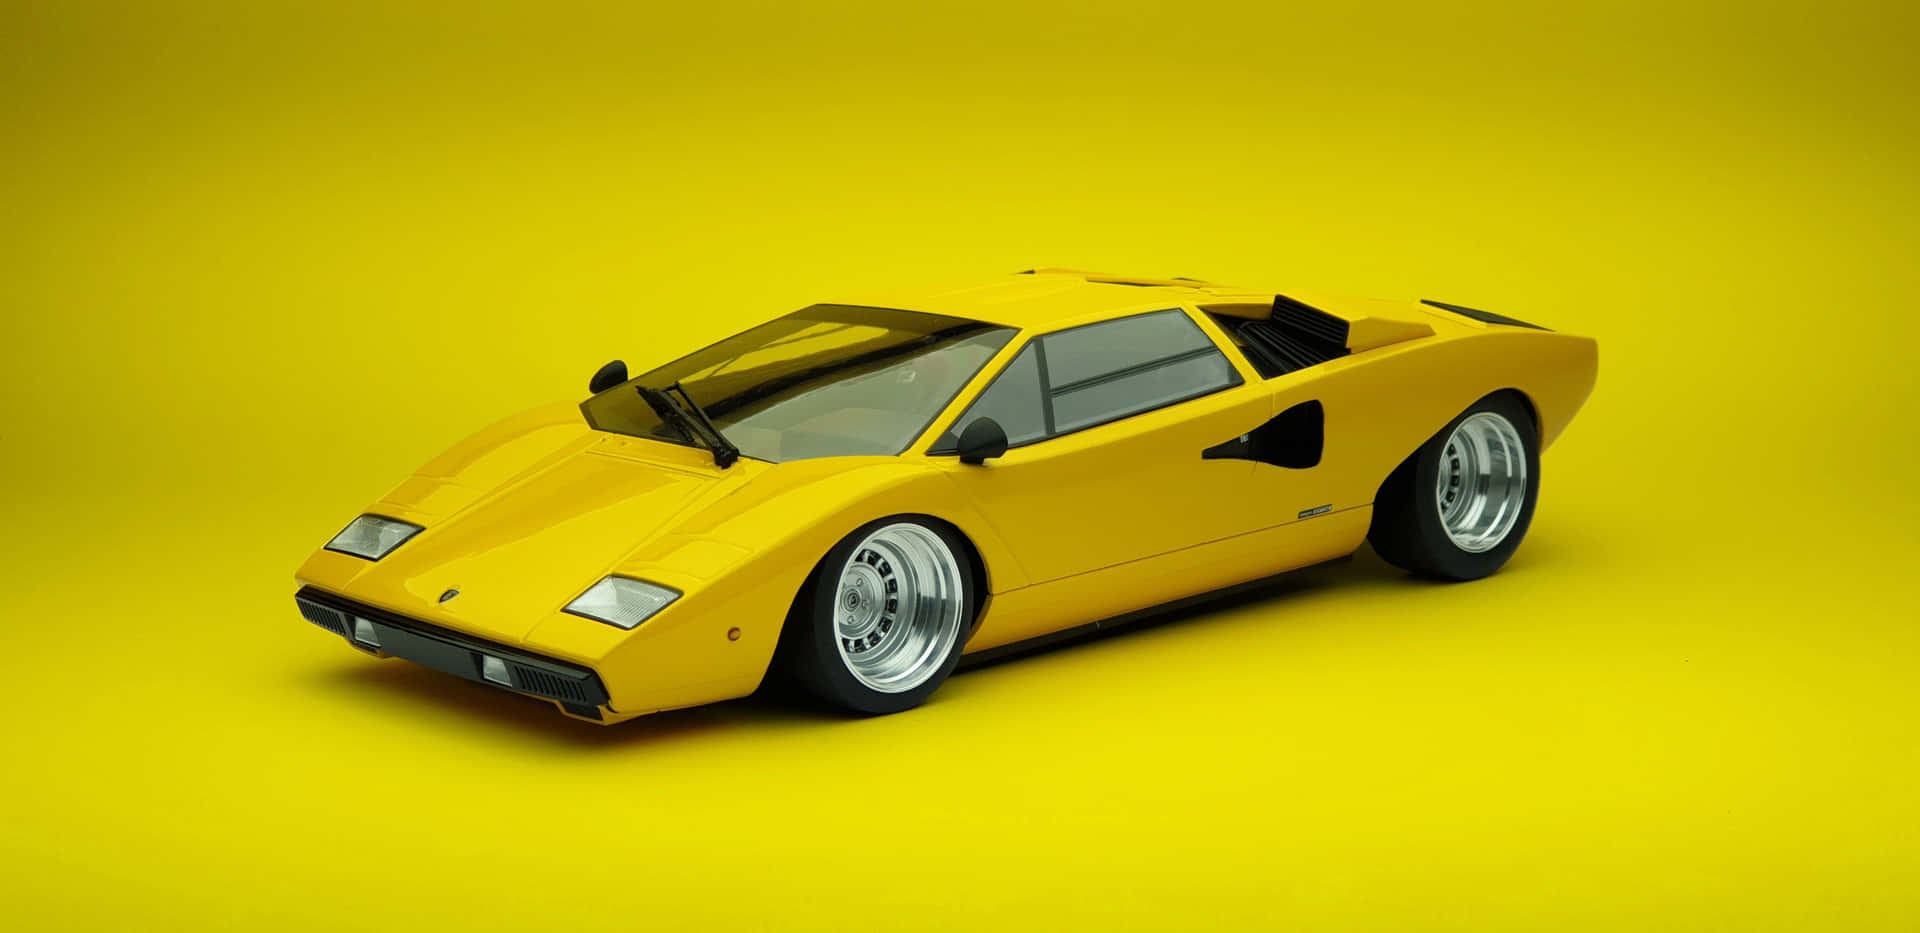 A classic Lamborghini Countach on the road. Iconic luxury sports car that surpasses time. Wallpaper